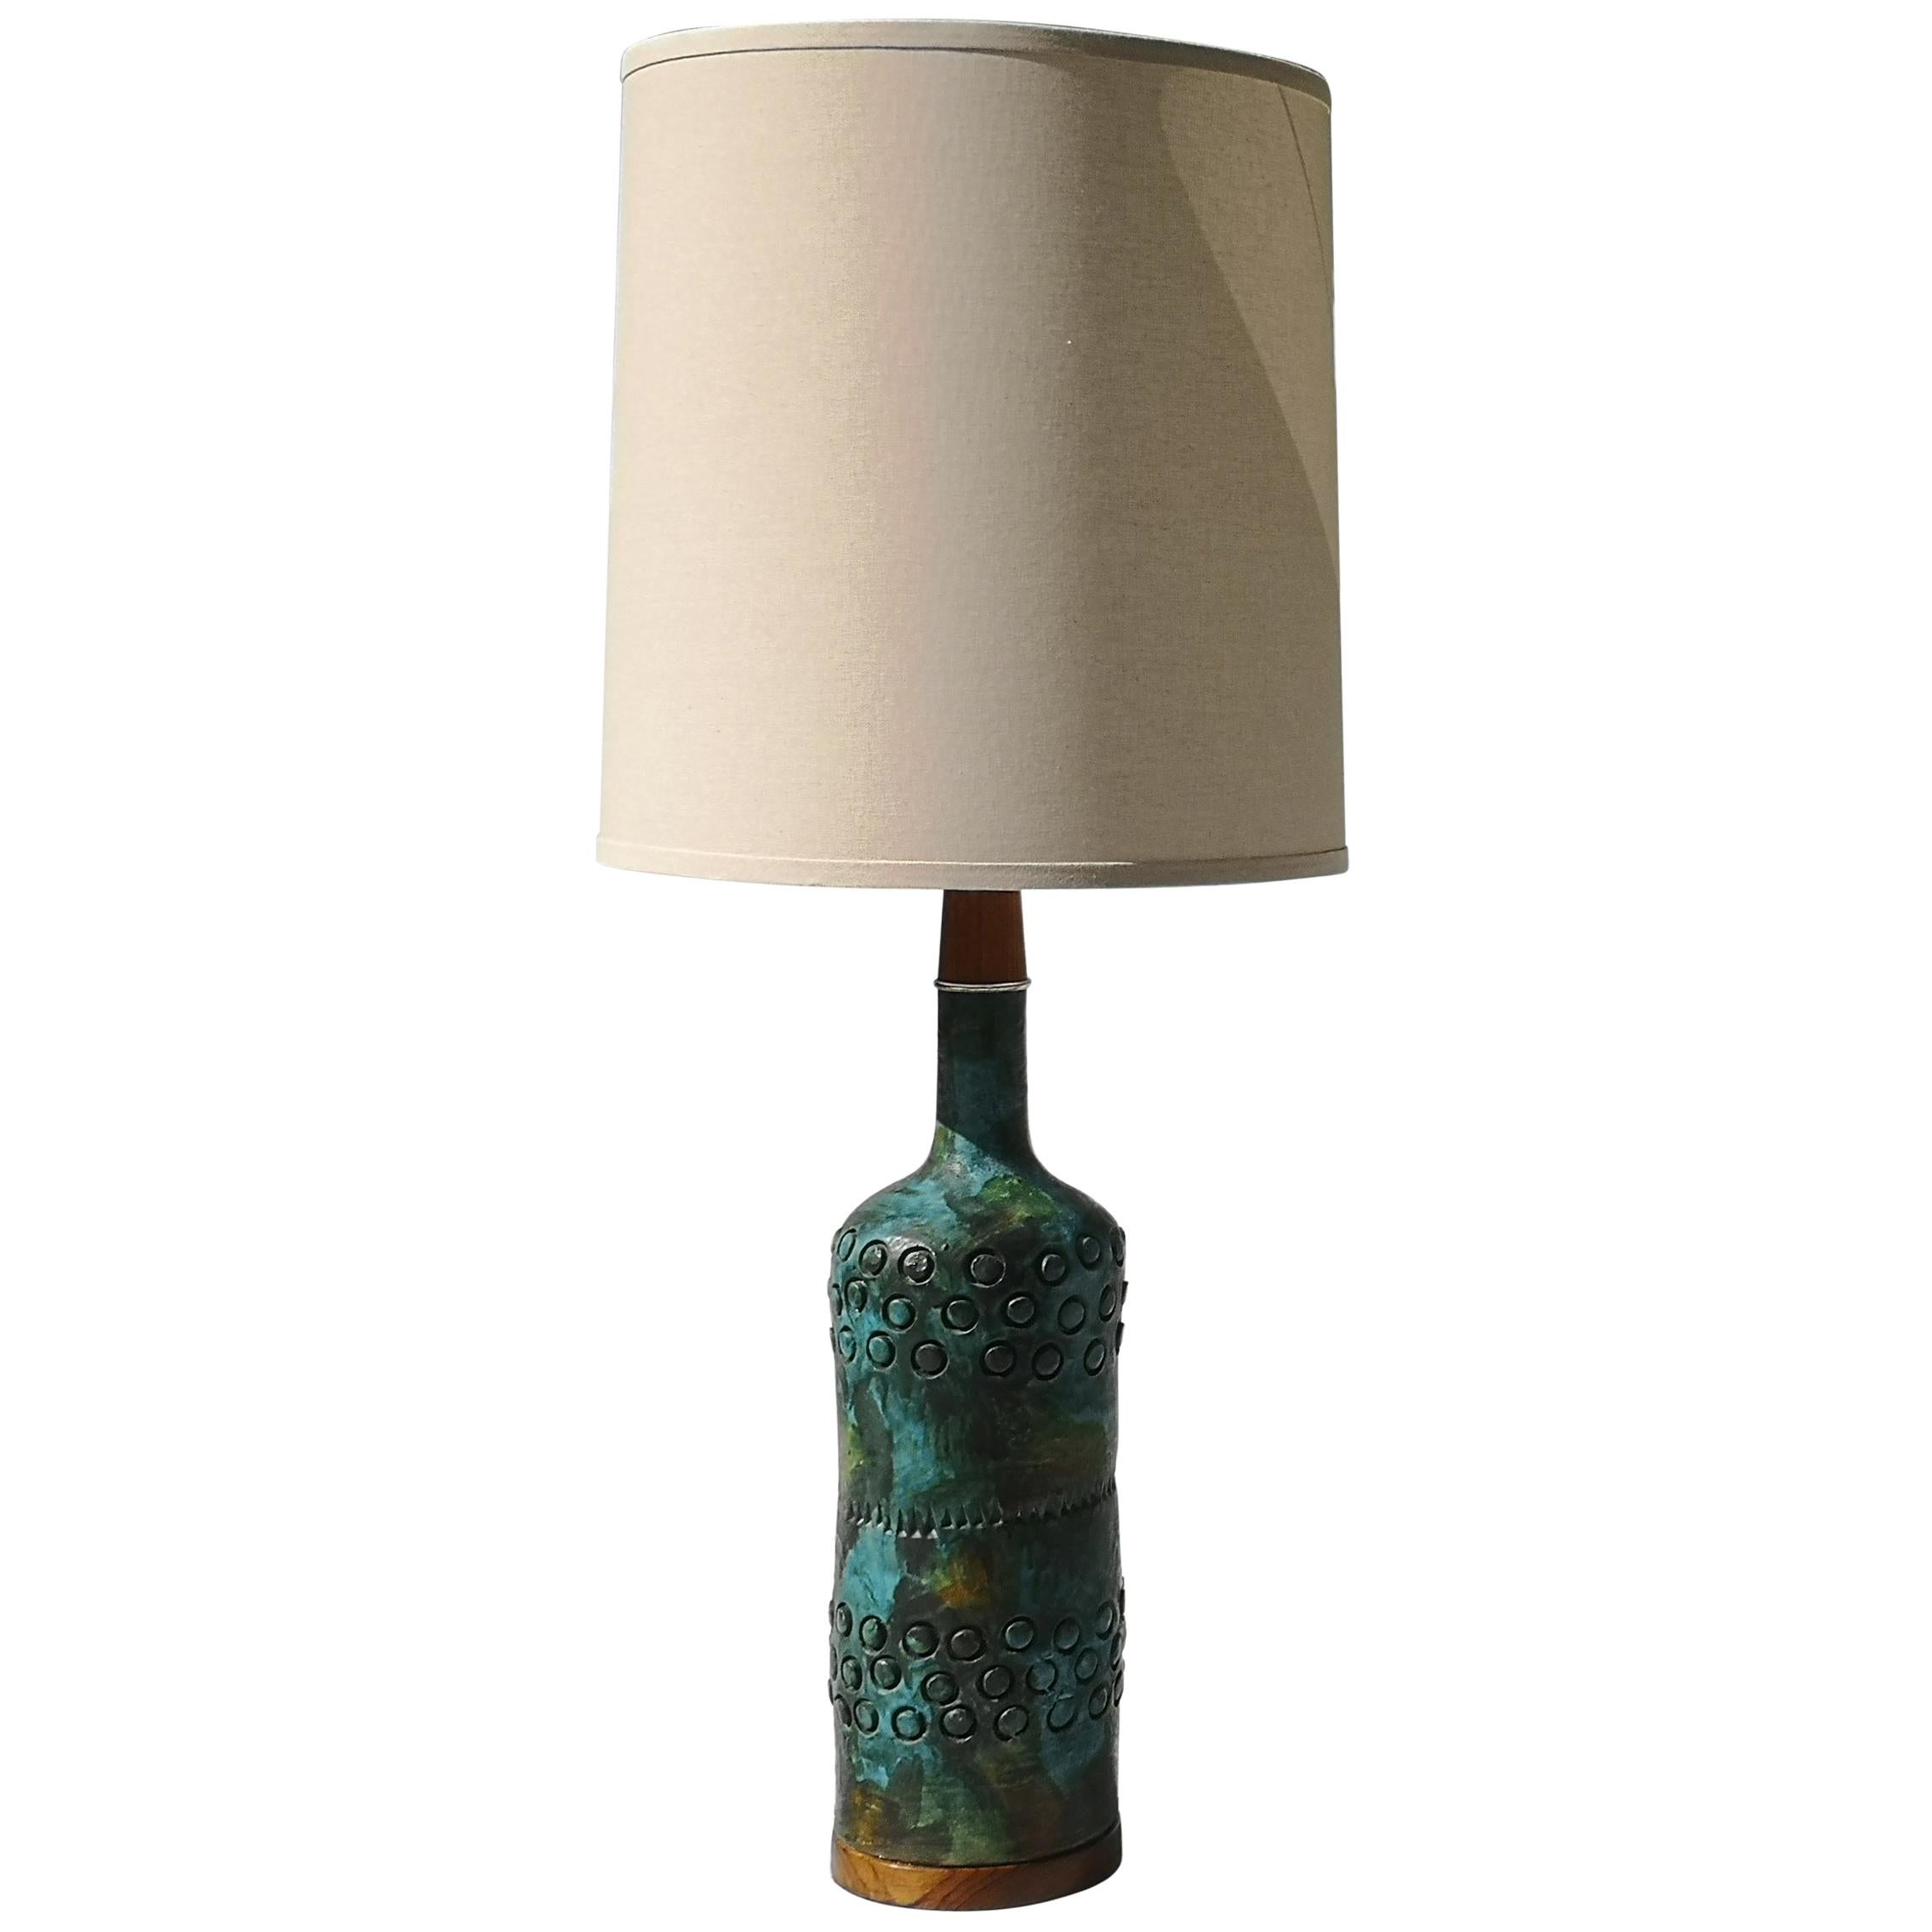 Midcentury Teak and Ceramic Table Lamp by Alvino Bagni, 1960s For Sale